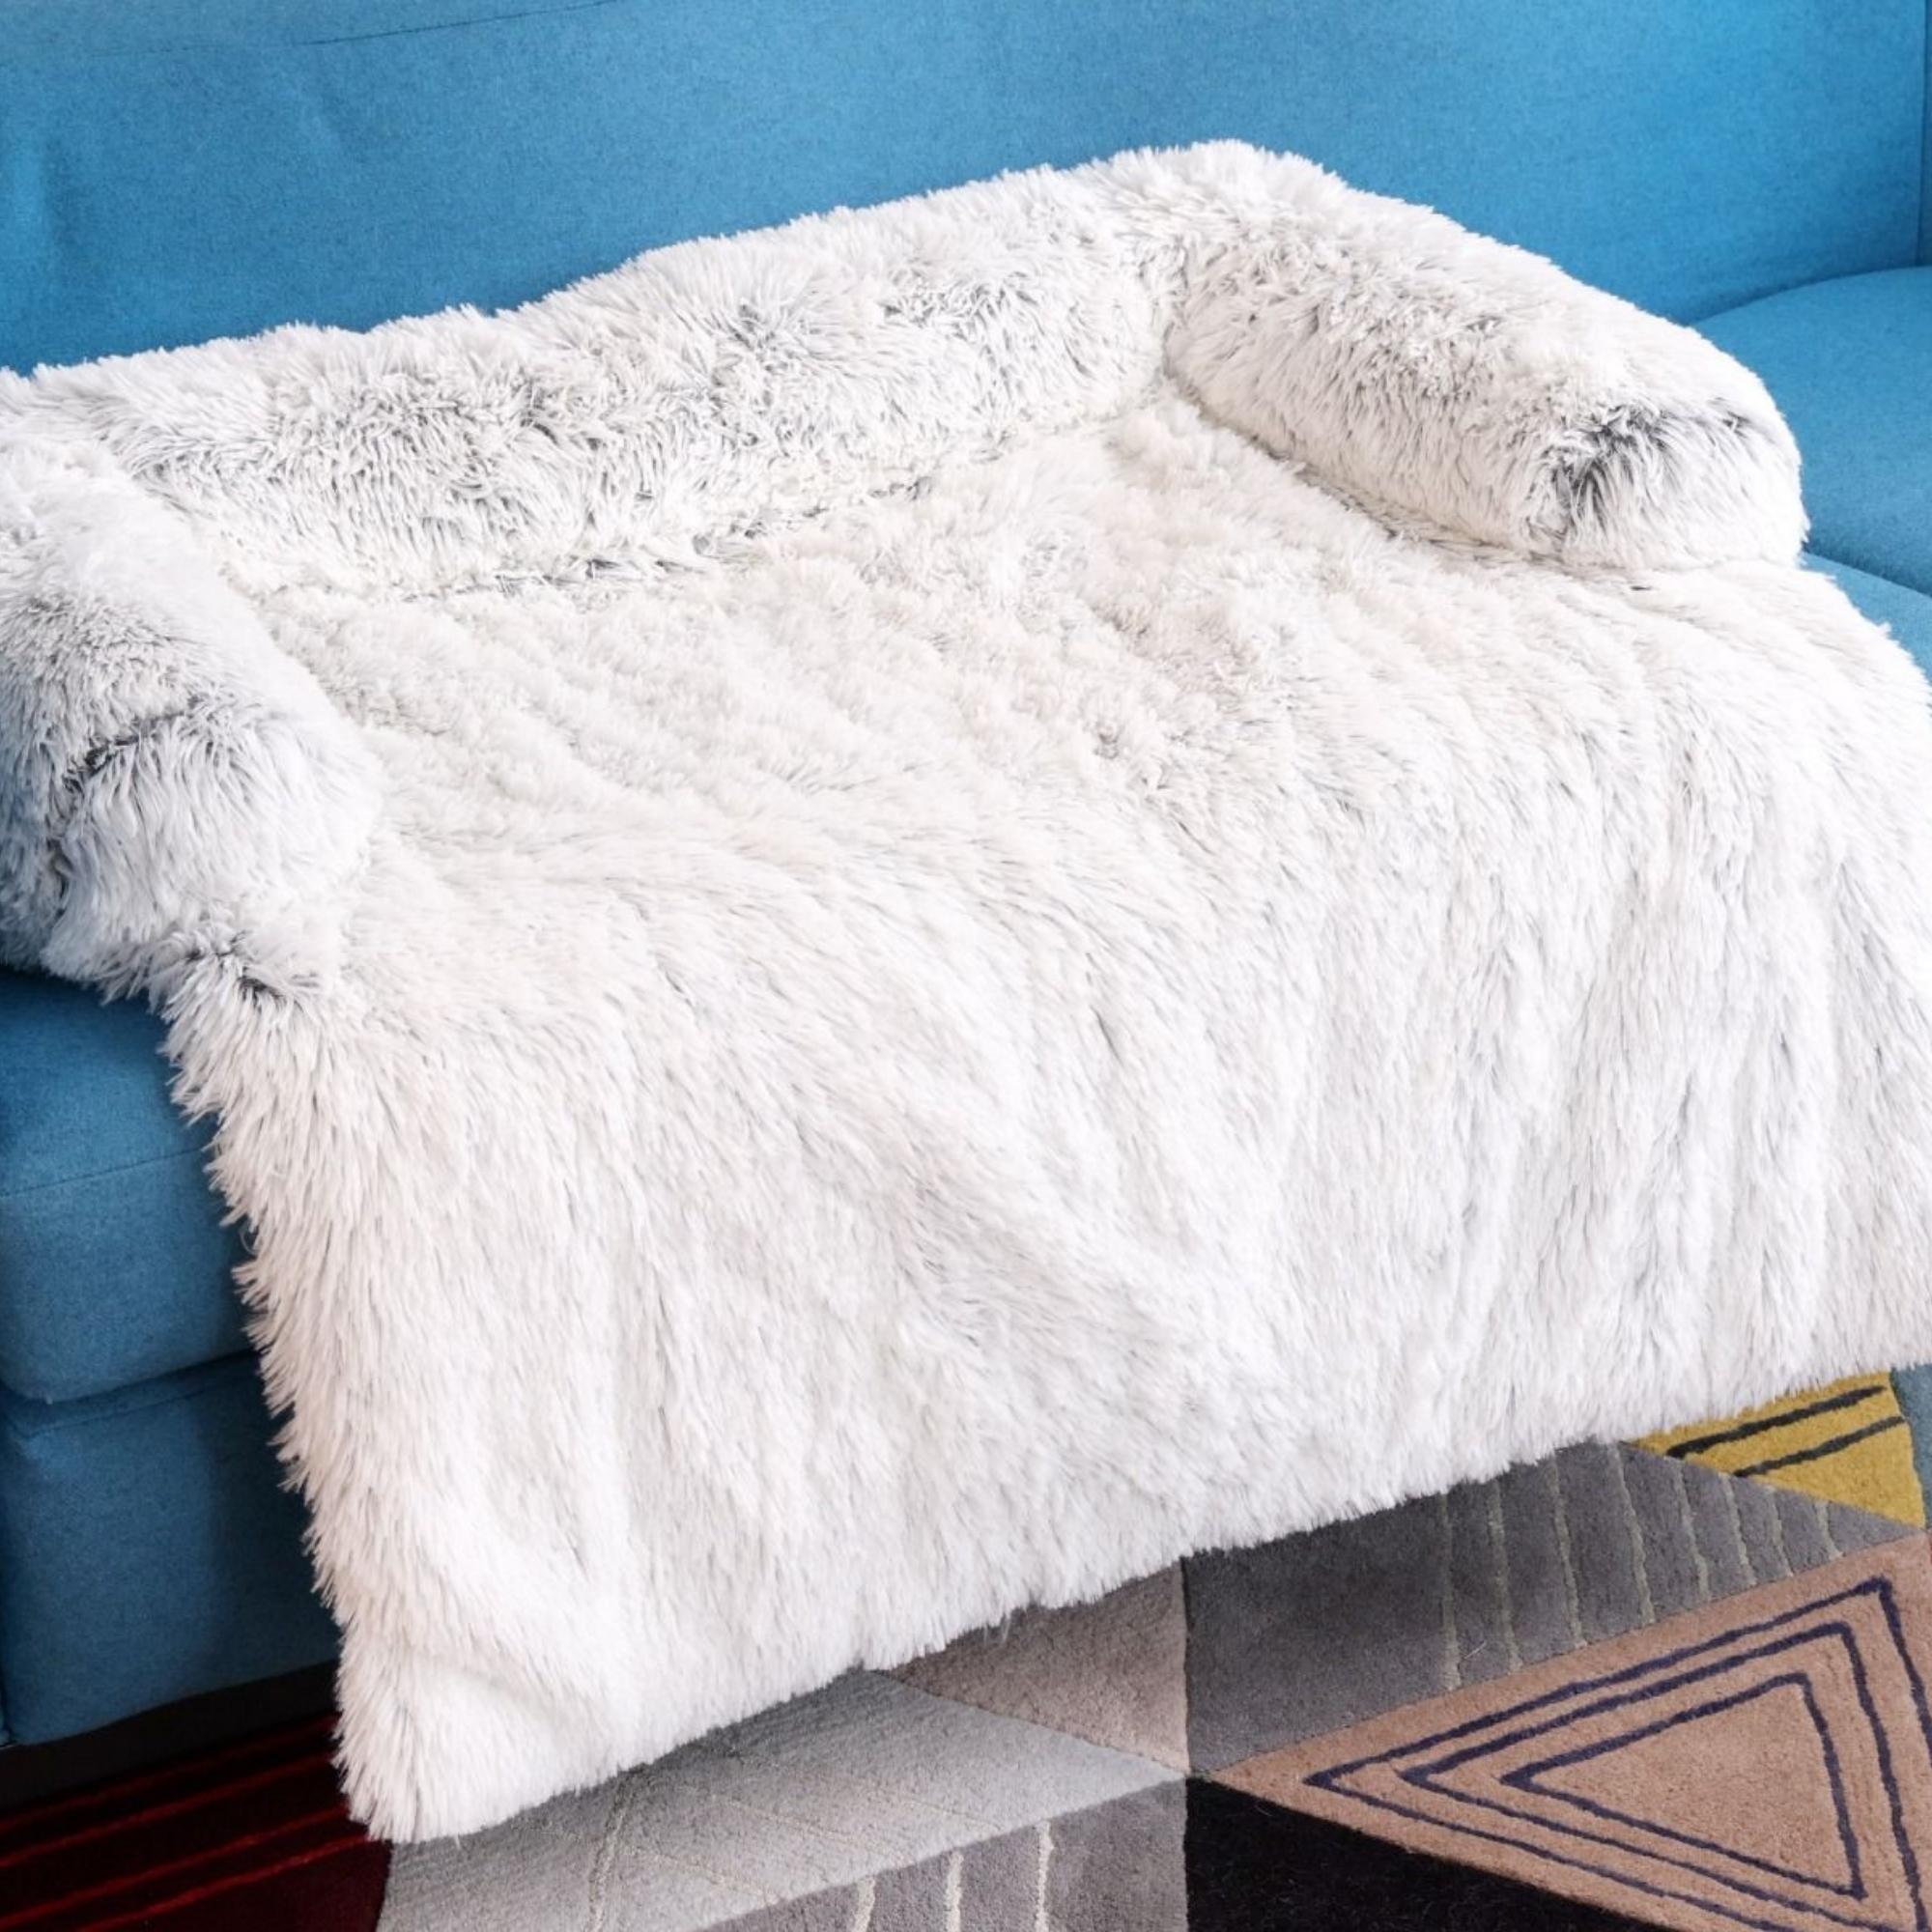 Multipet Lamb Chop Bolster Style Dog Bed Medium 27in x 18.5 in